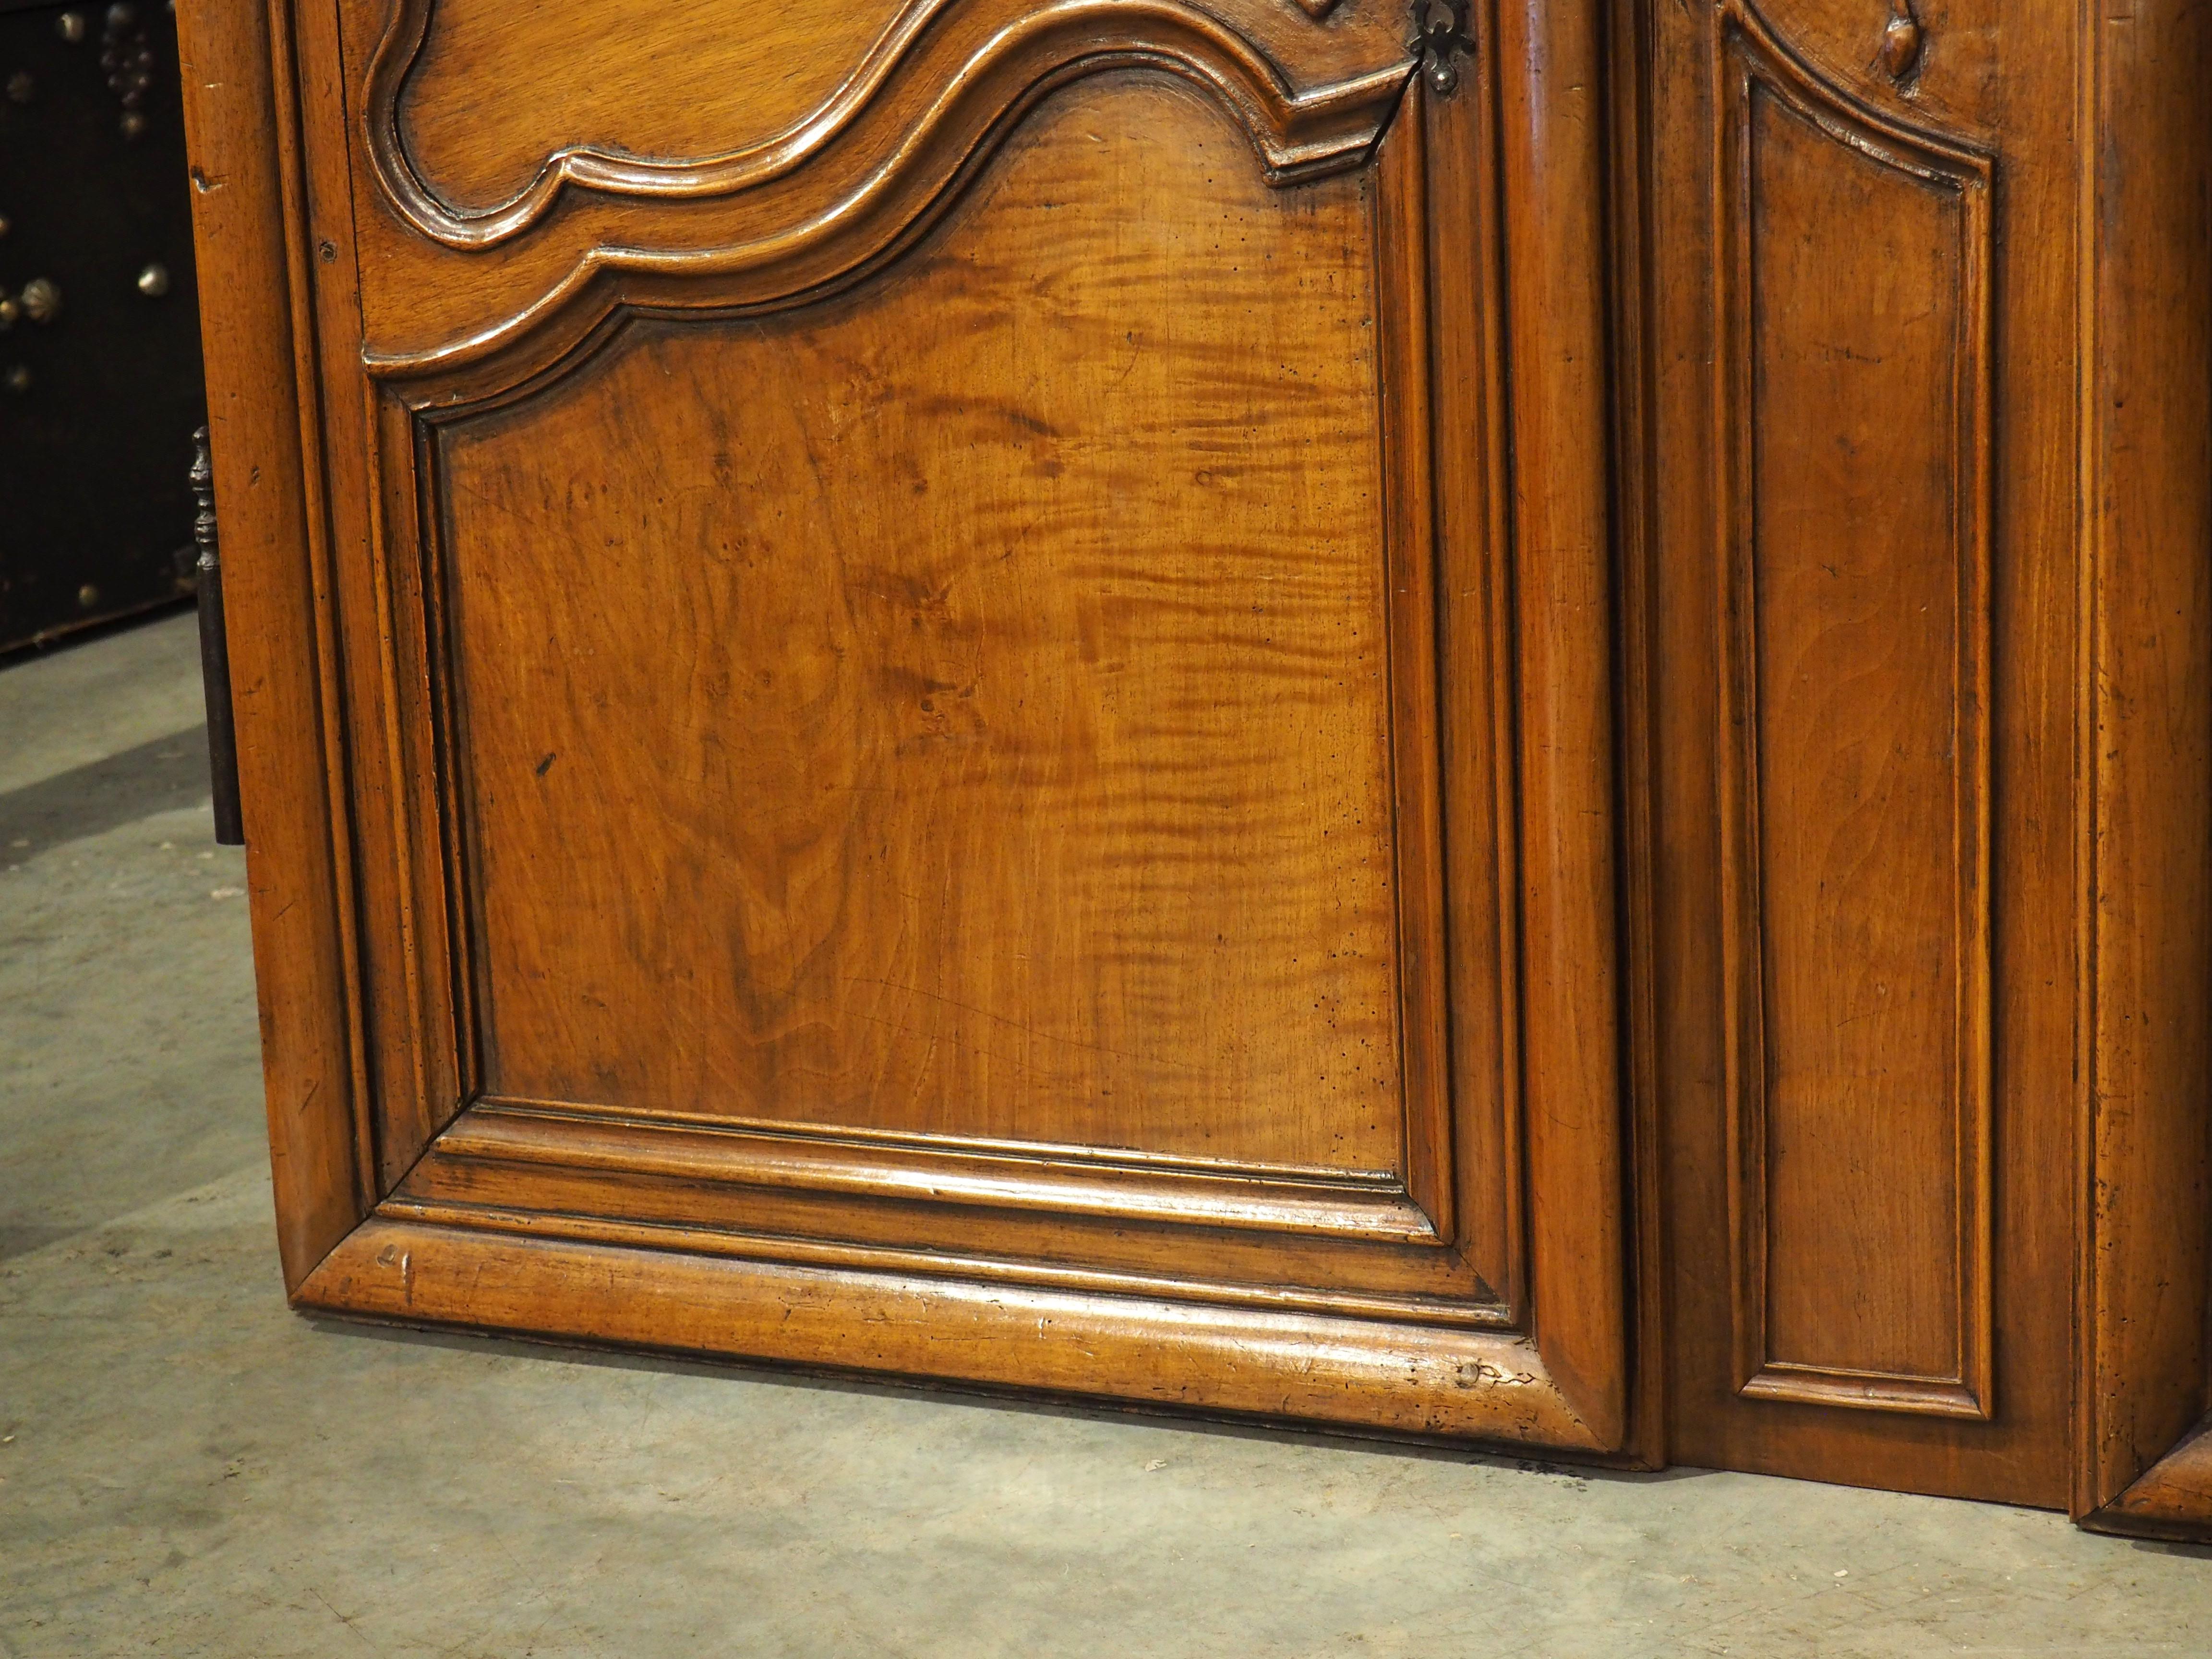 Pair of Circa 1750 Solid Walnut Façade or Cabinet Doors from Provence, France In Good Condition For Sale In Dallas, TX